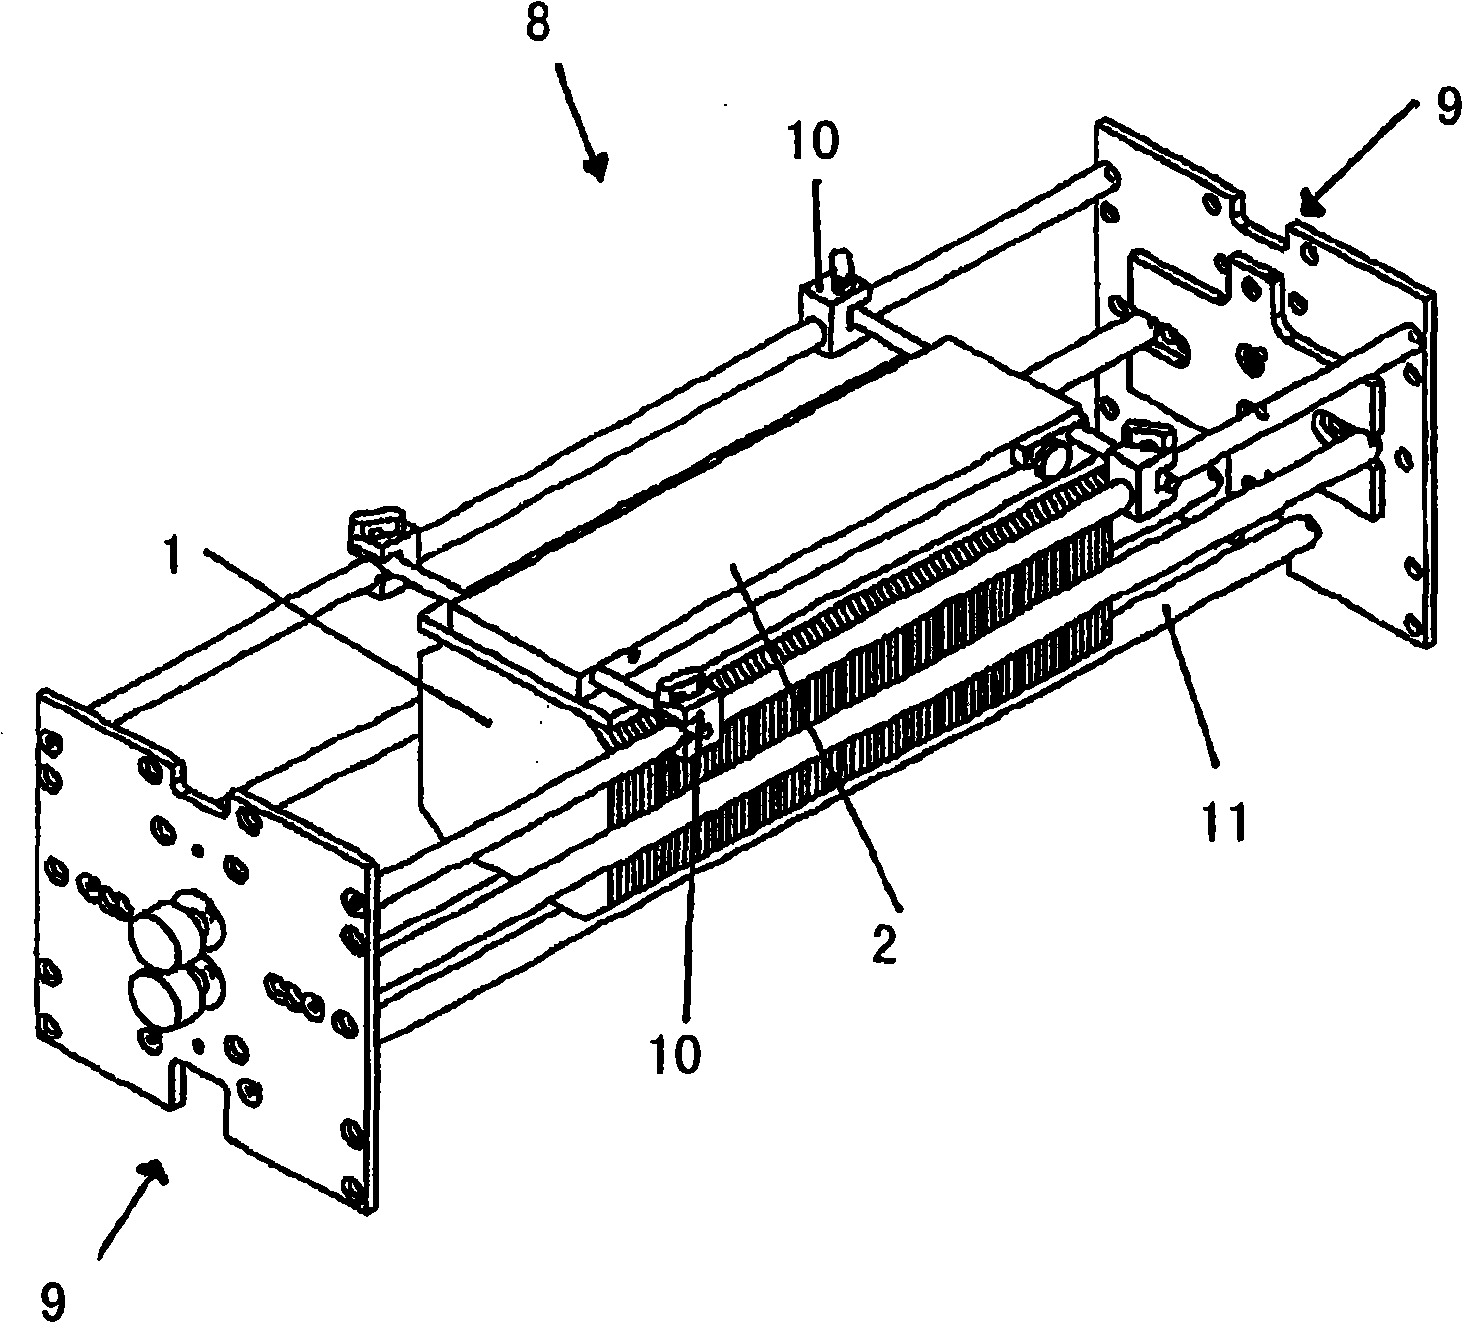 Apparatus and method for cleaning of objects, in particular of thin discs